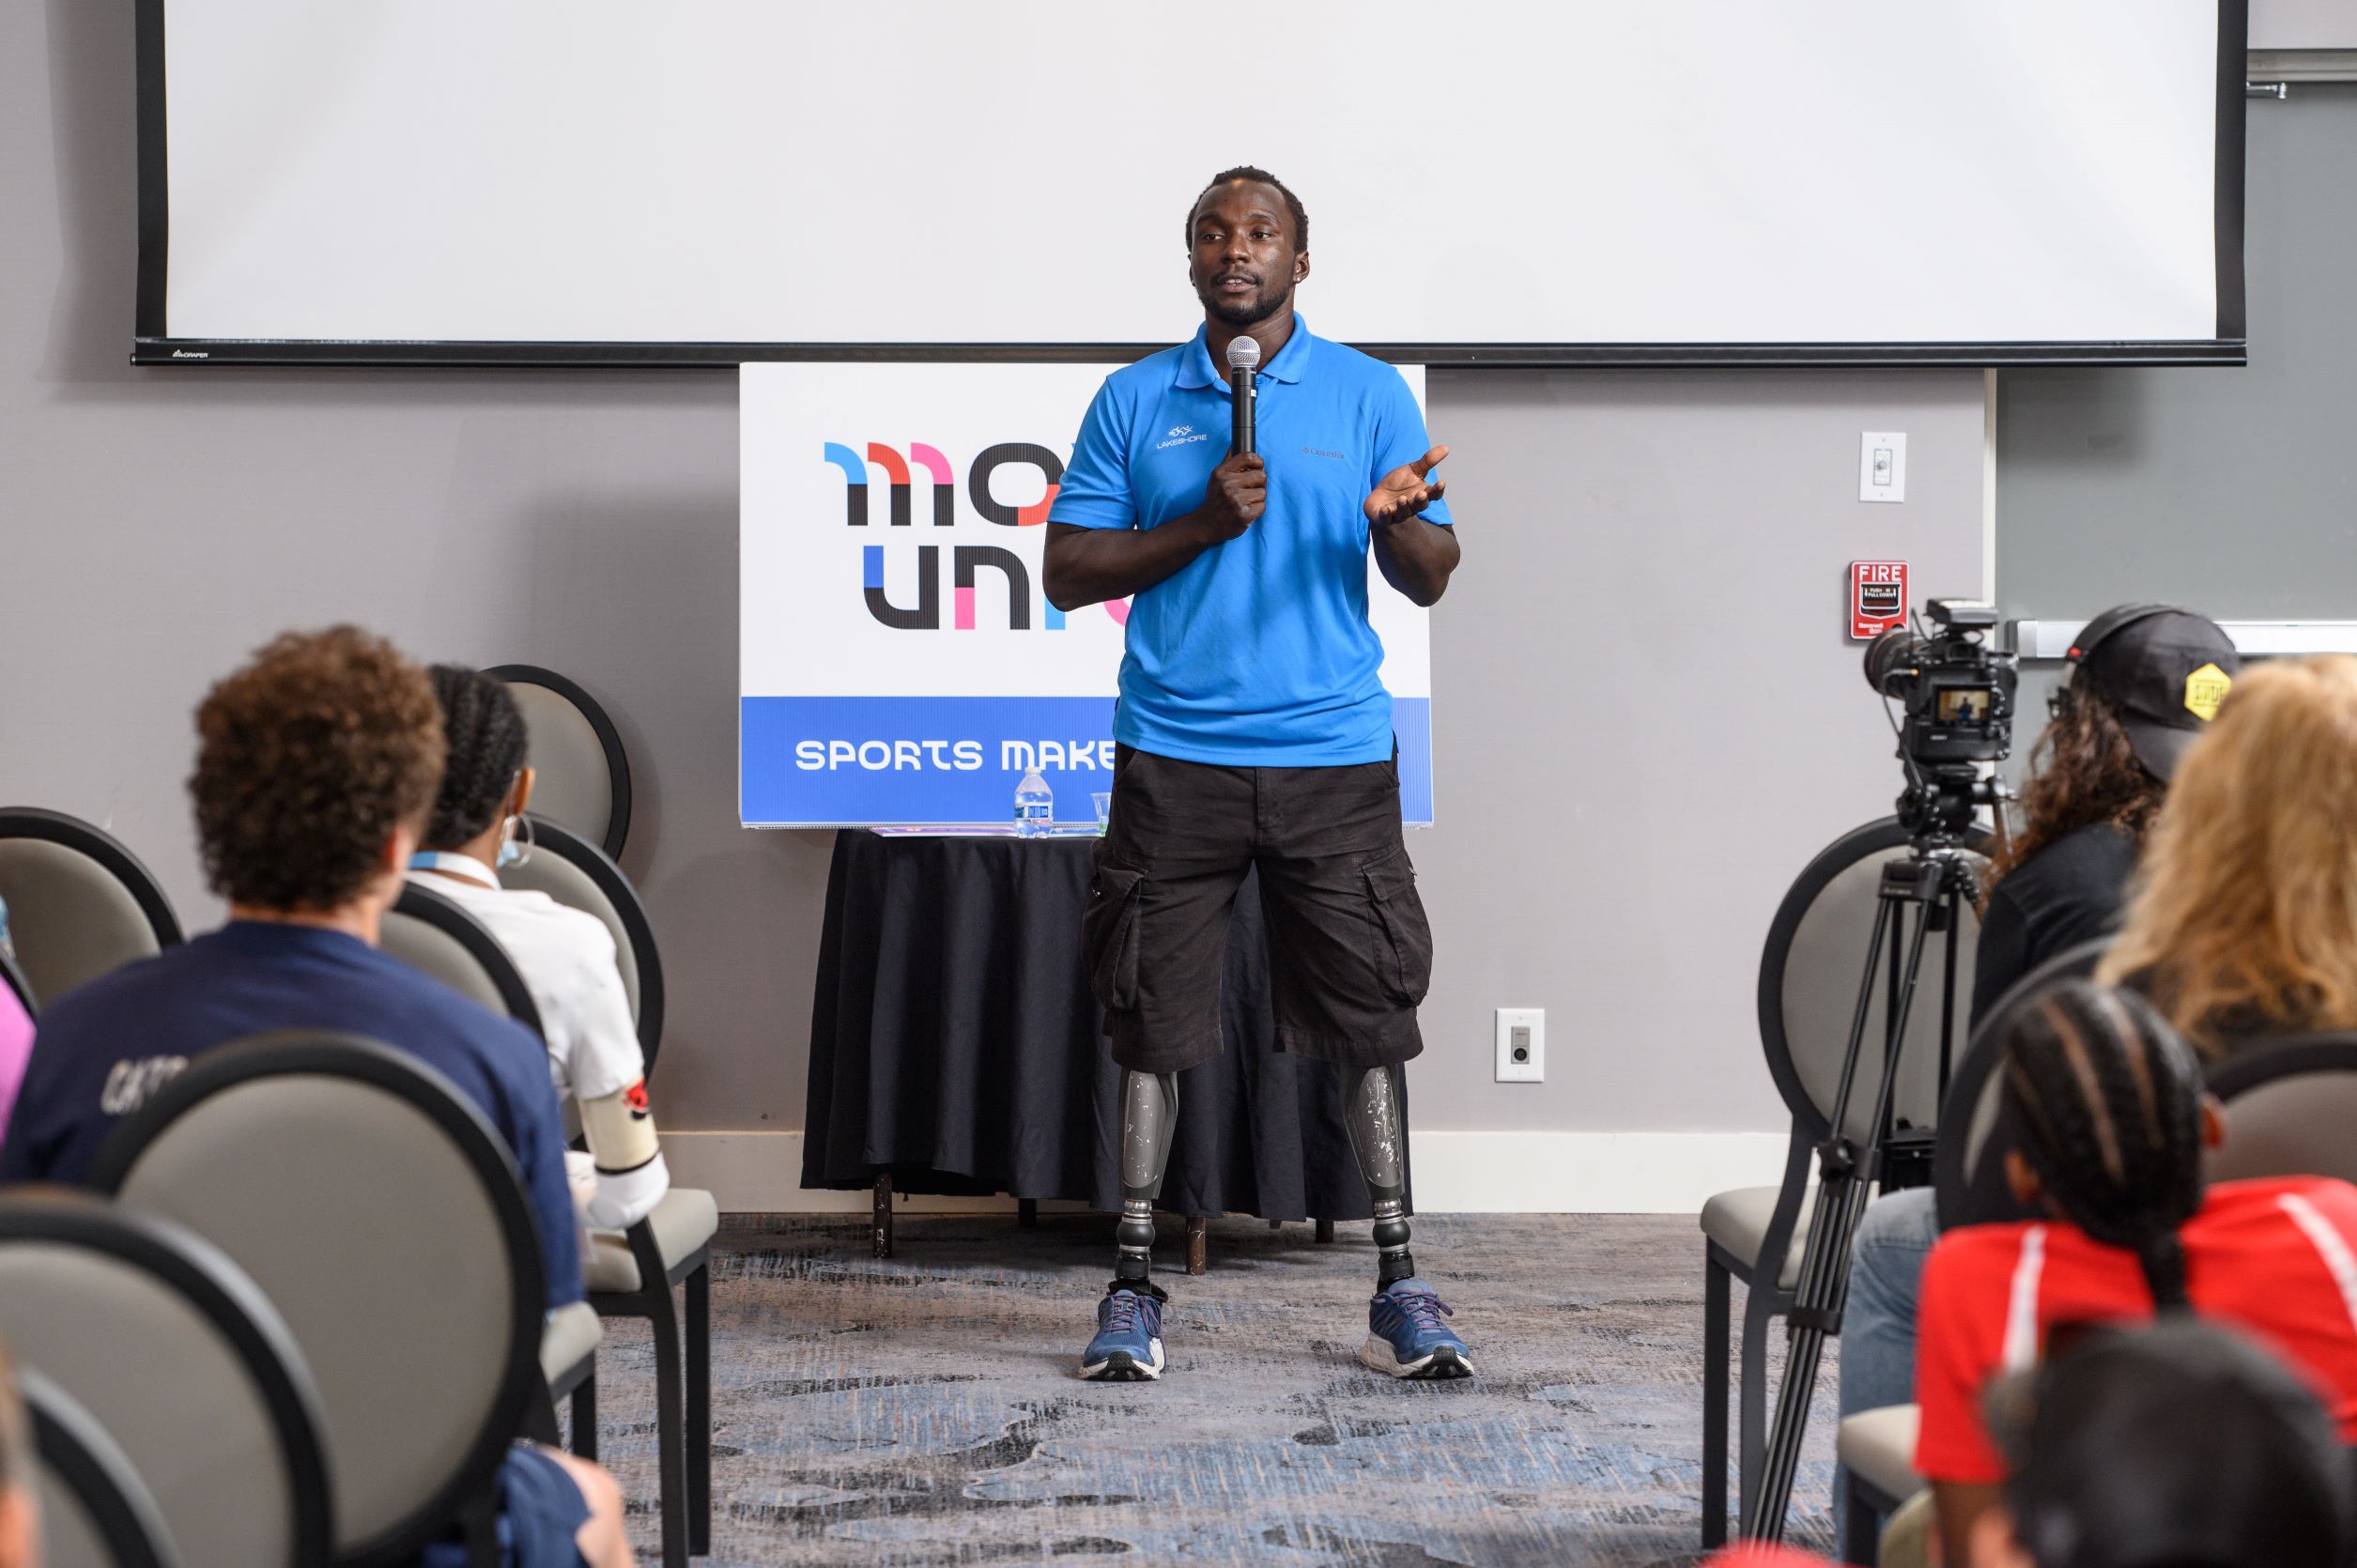 Presenter with double leg amputation speaking in front of audience with Move United logo behind him